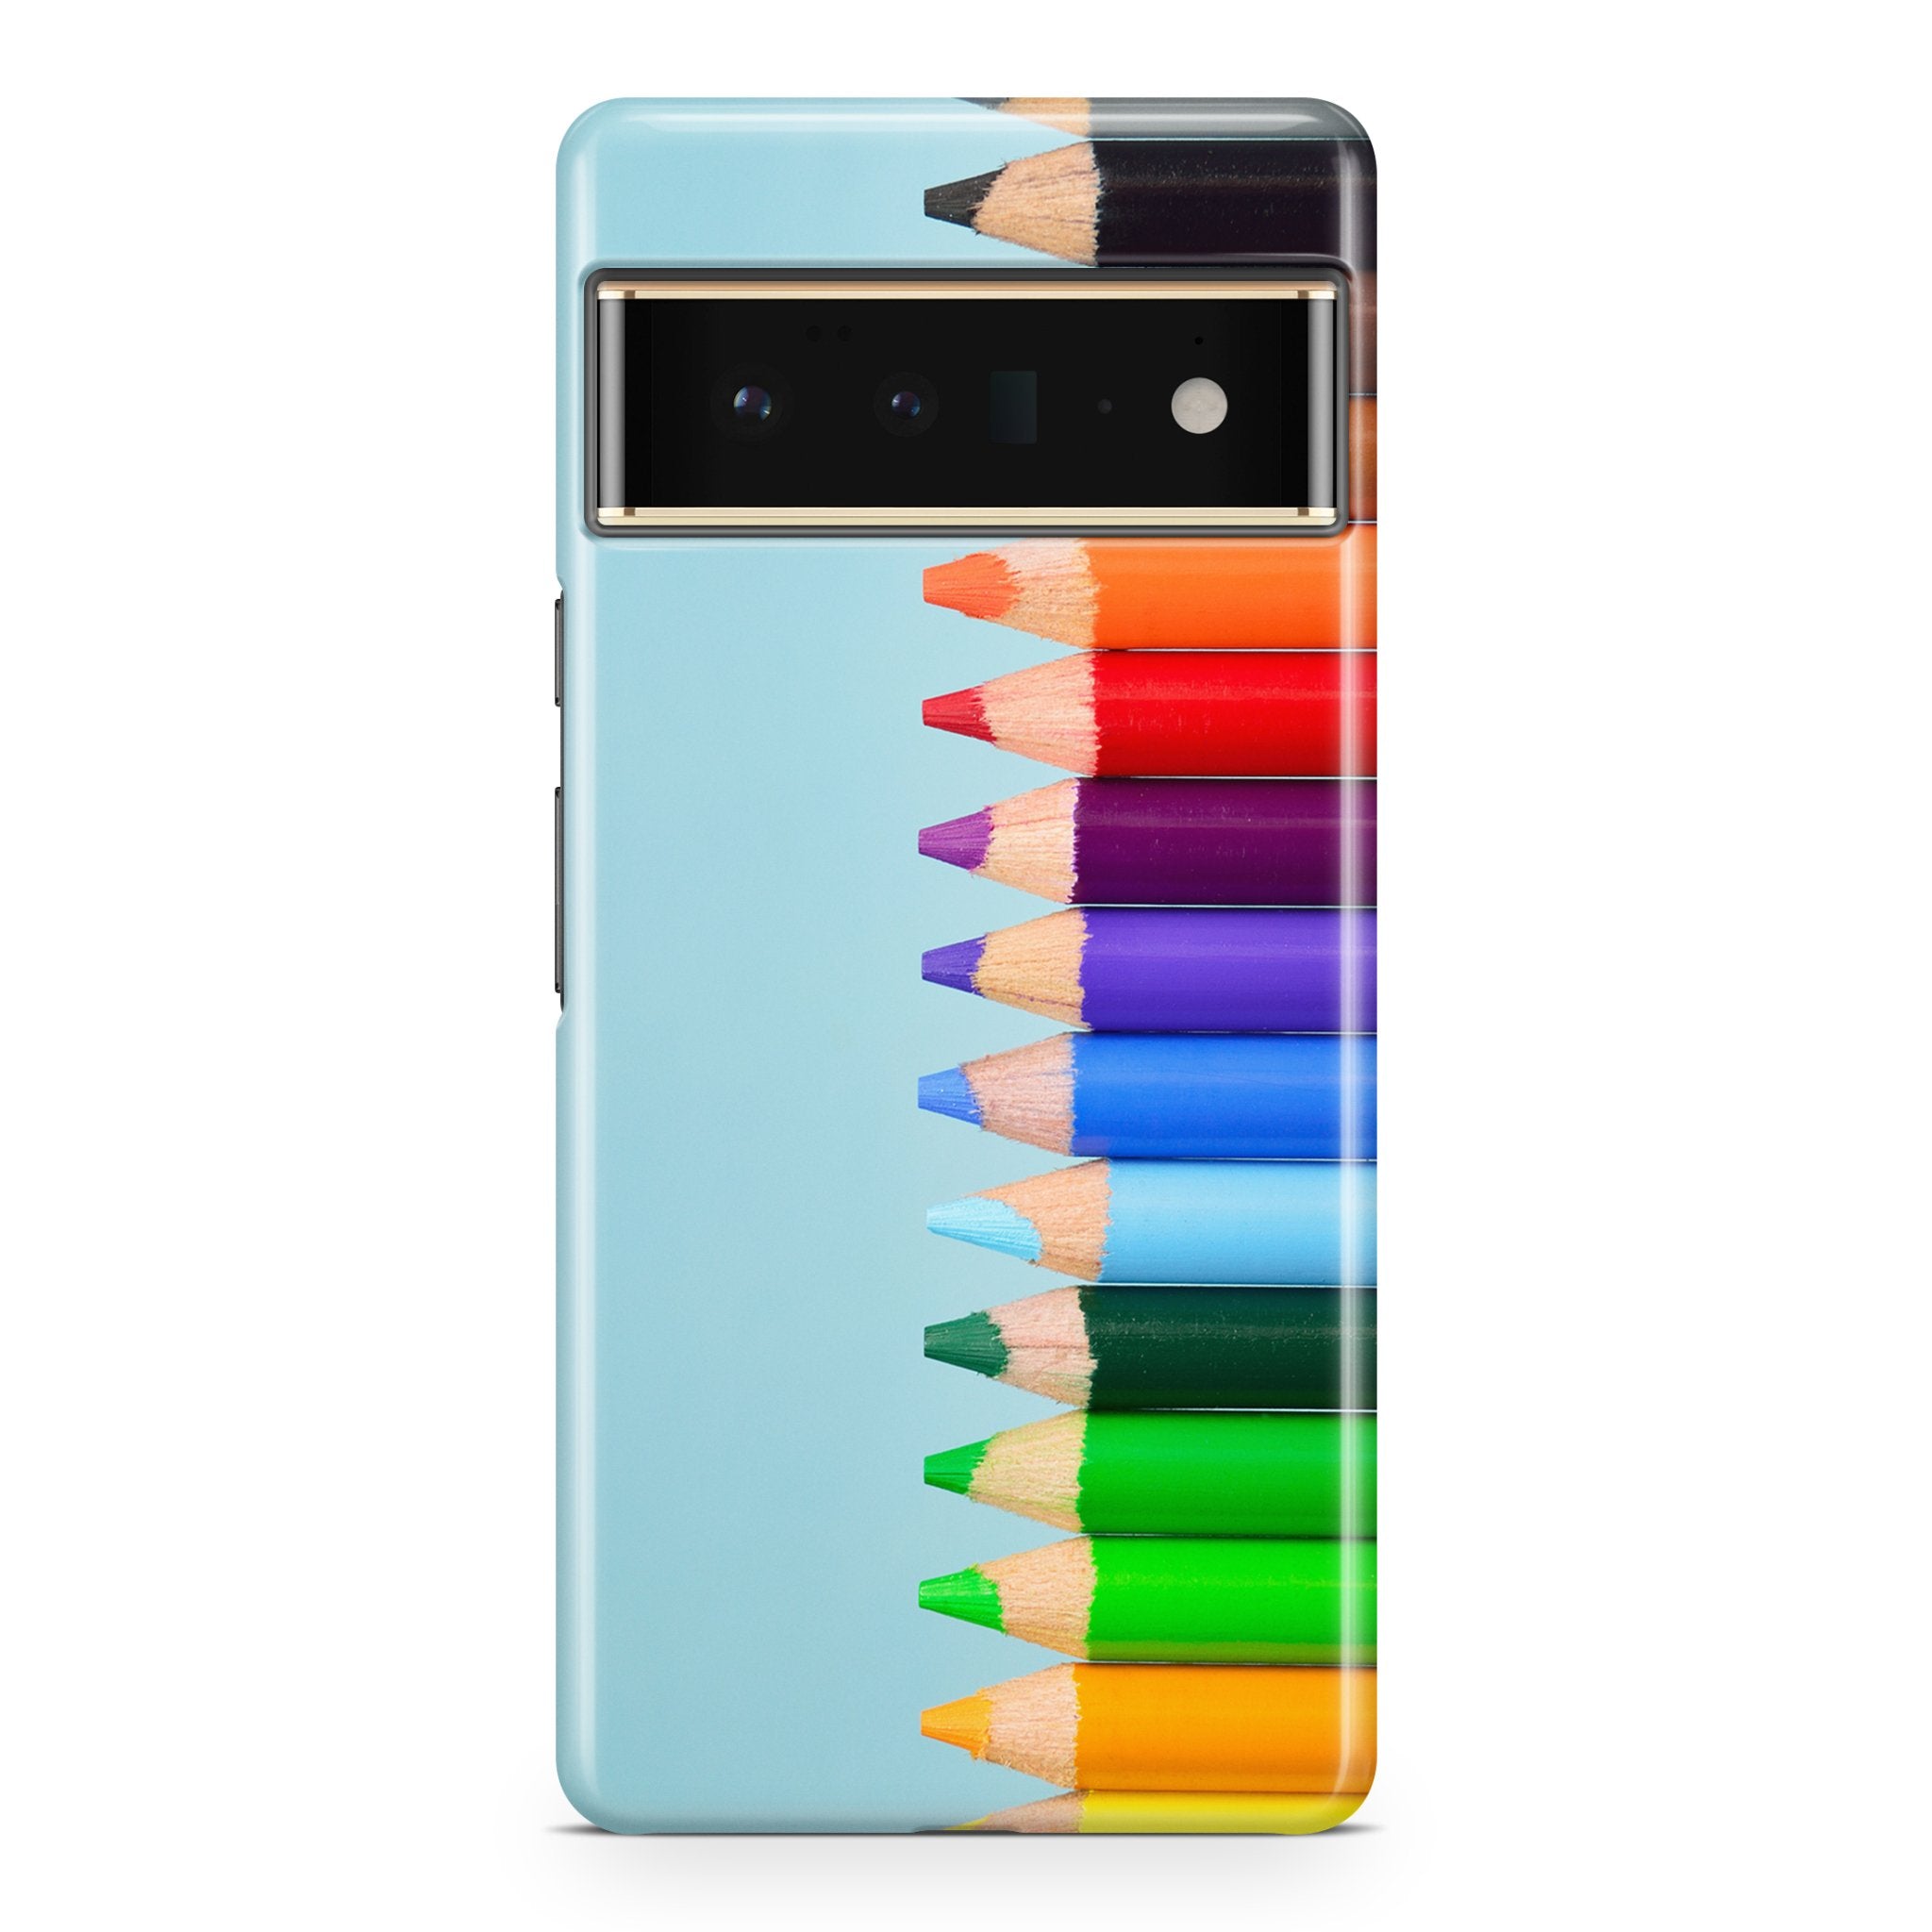 Colored Pencils - Google phone case designs by CaseSwagger